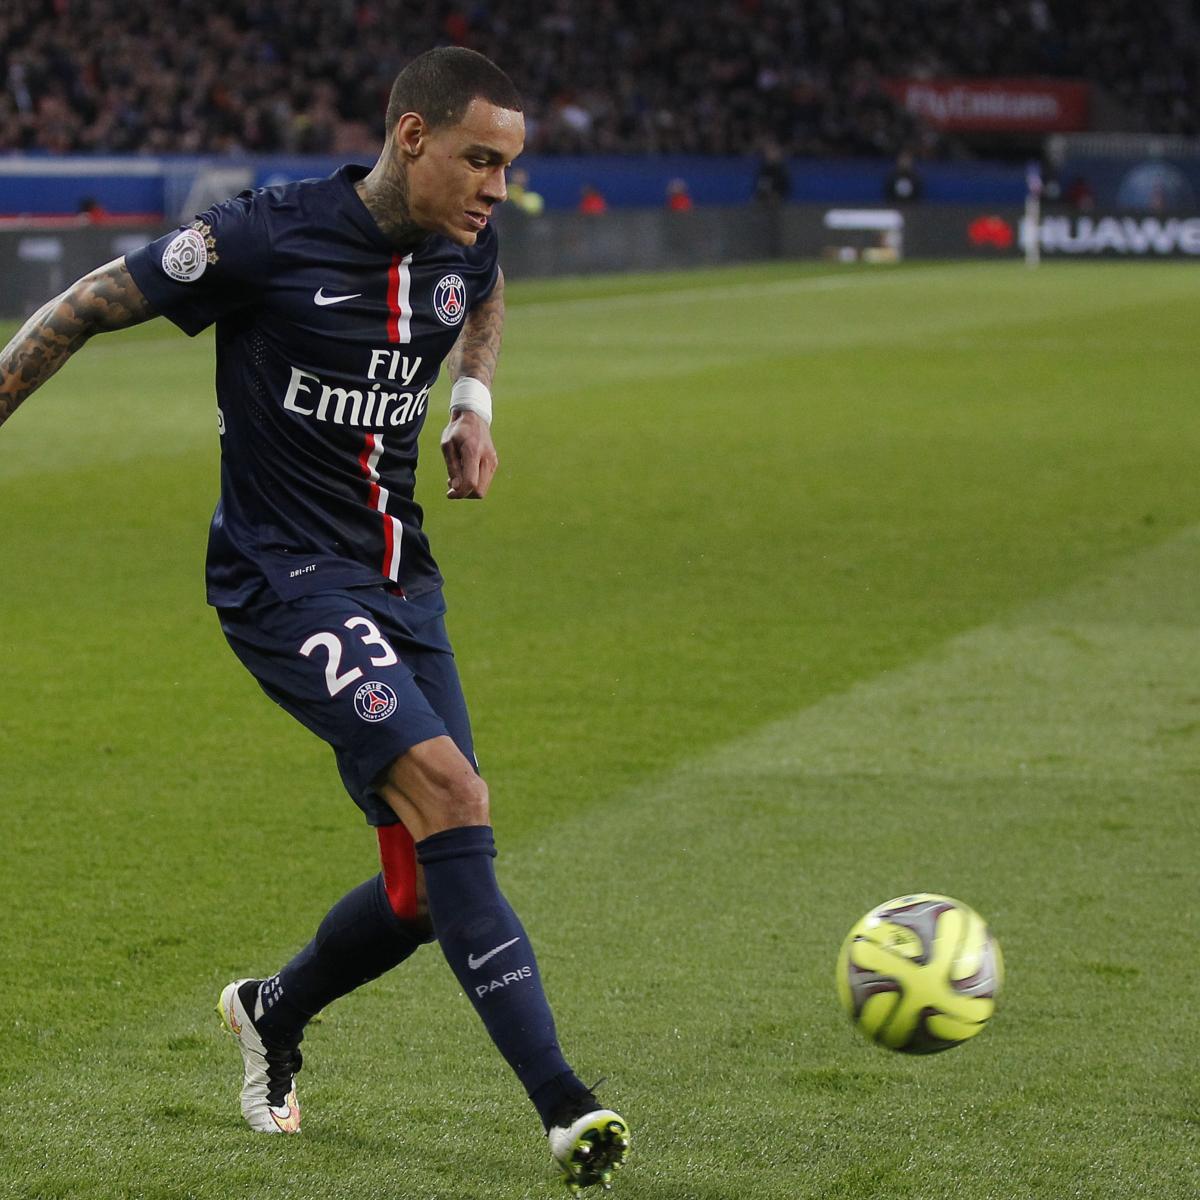 Gregory van der Wiel offered to Manchester United? - Sports Mole